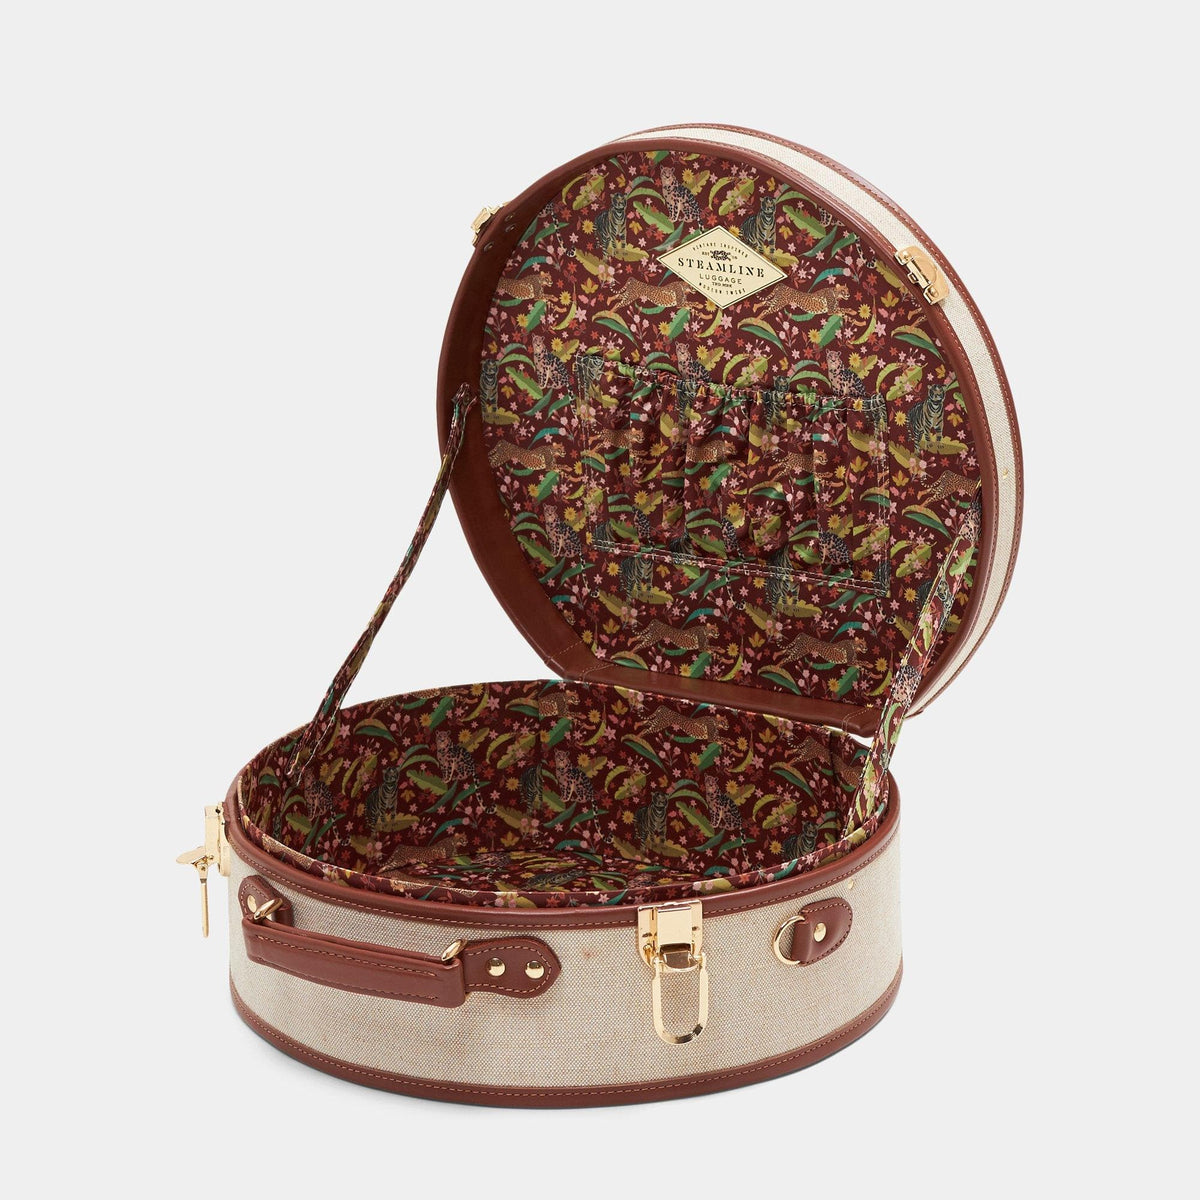 The Editor - Brown Hatbox Large Hatbox Large Steamline Luggage 